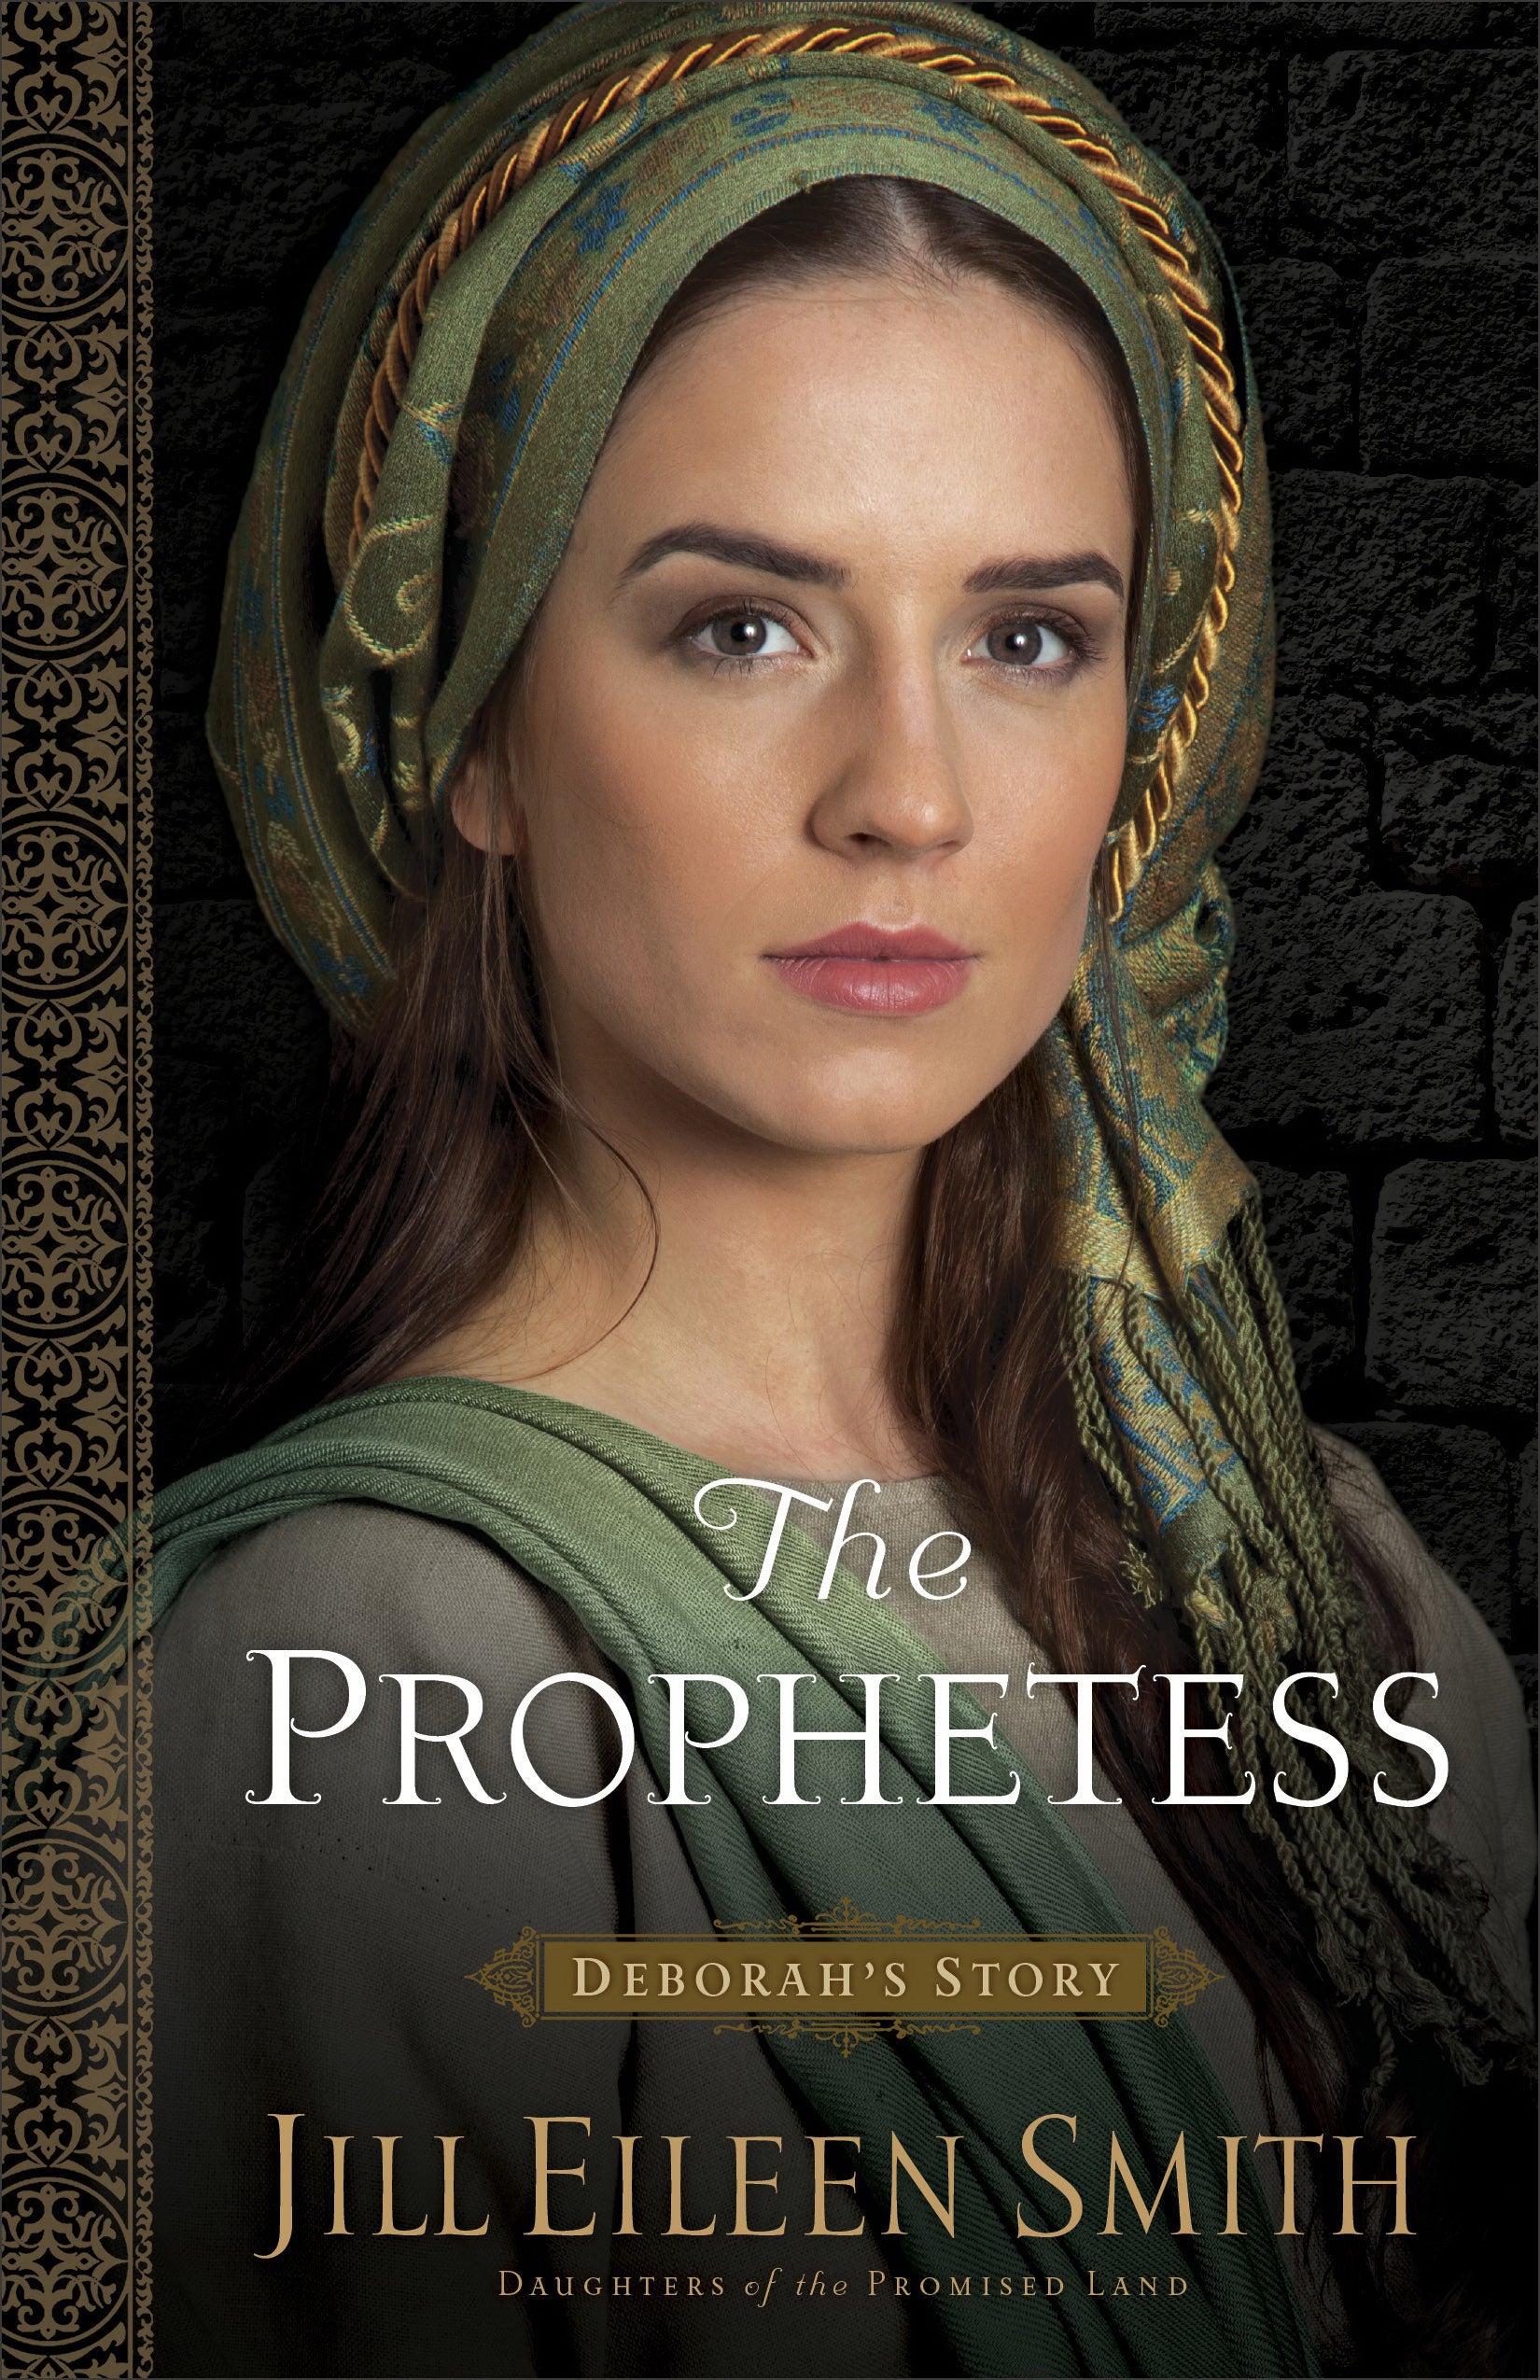 Image of The Prophetess other